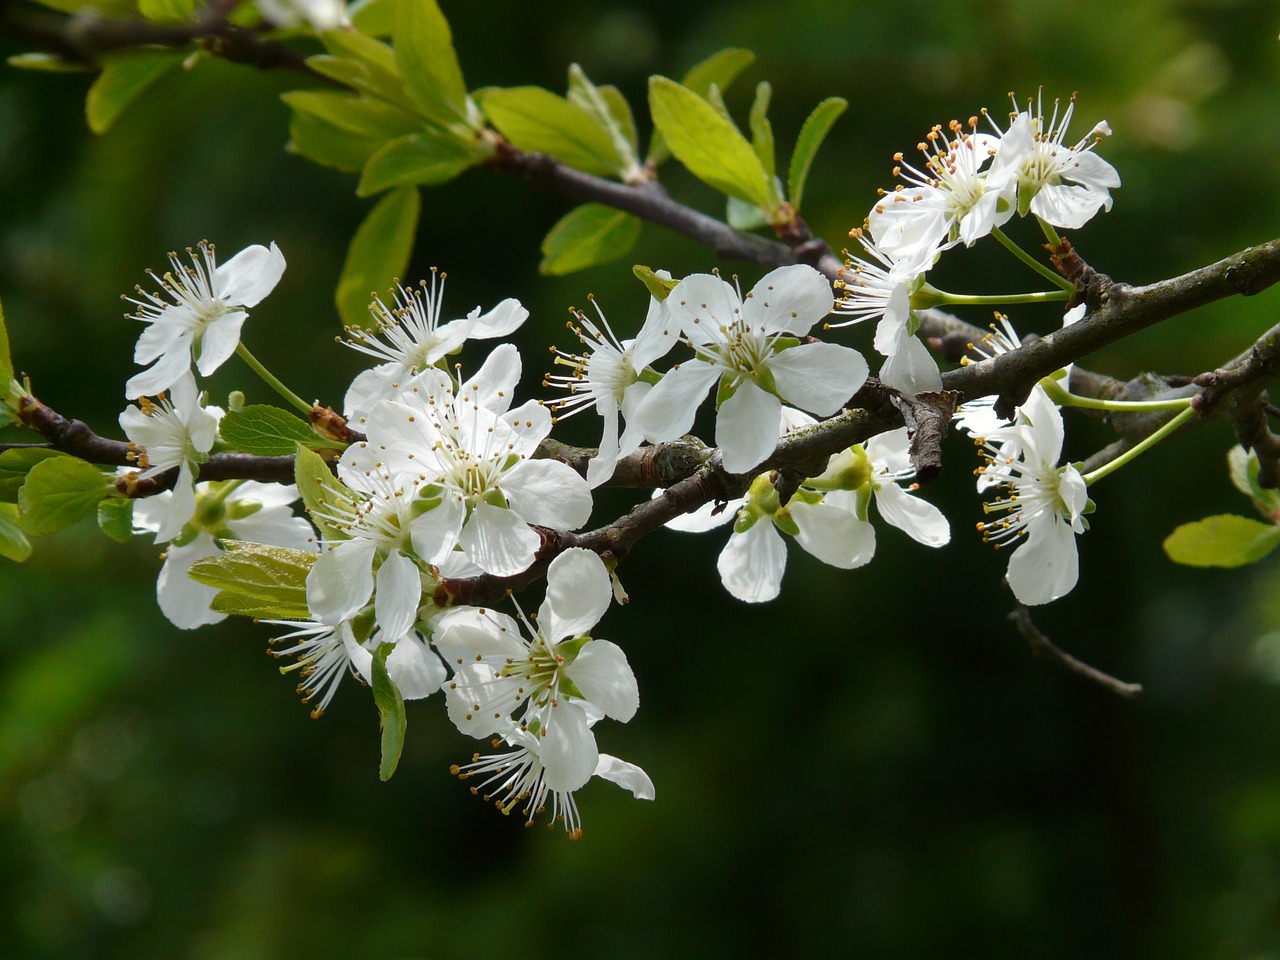 plum blossom,plum,blossom,bloom,tree,spring,bloom,white,branch,free pictures, free photos, free images, royalty free, free illustrations, public domain